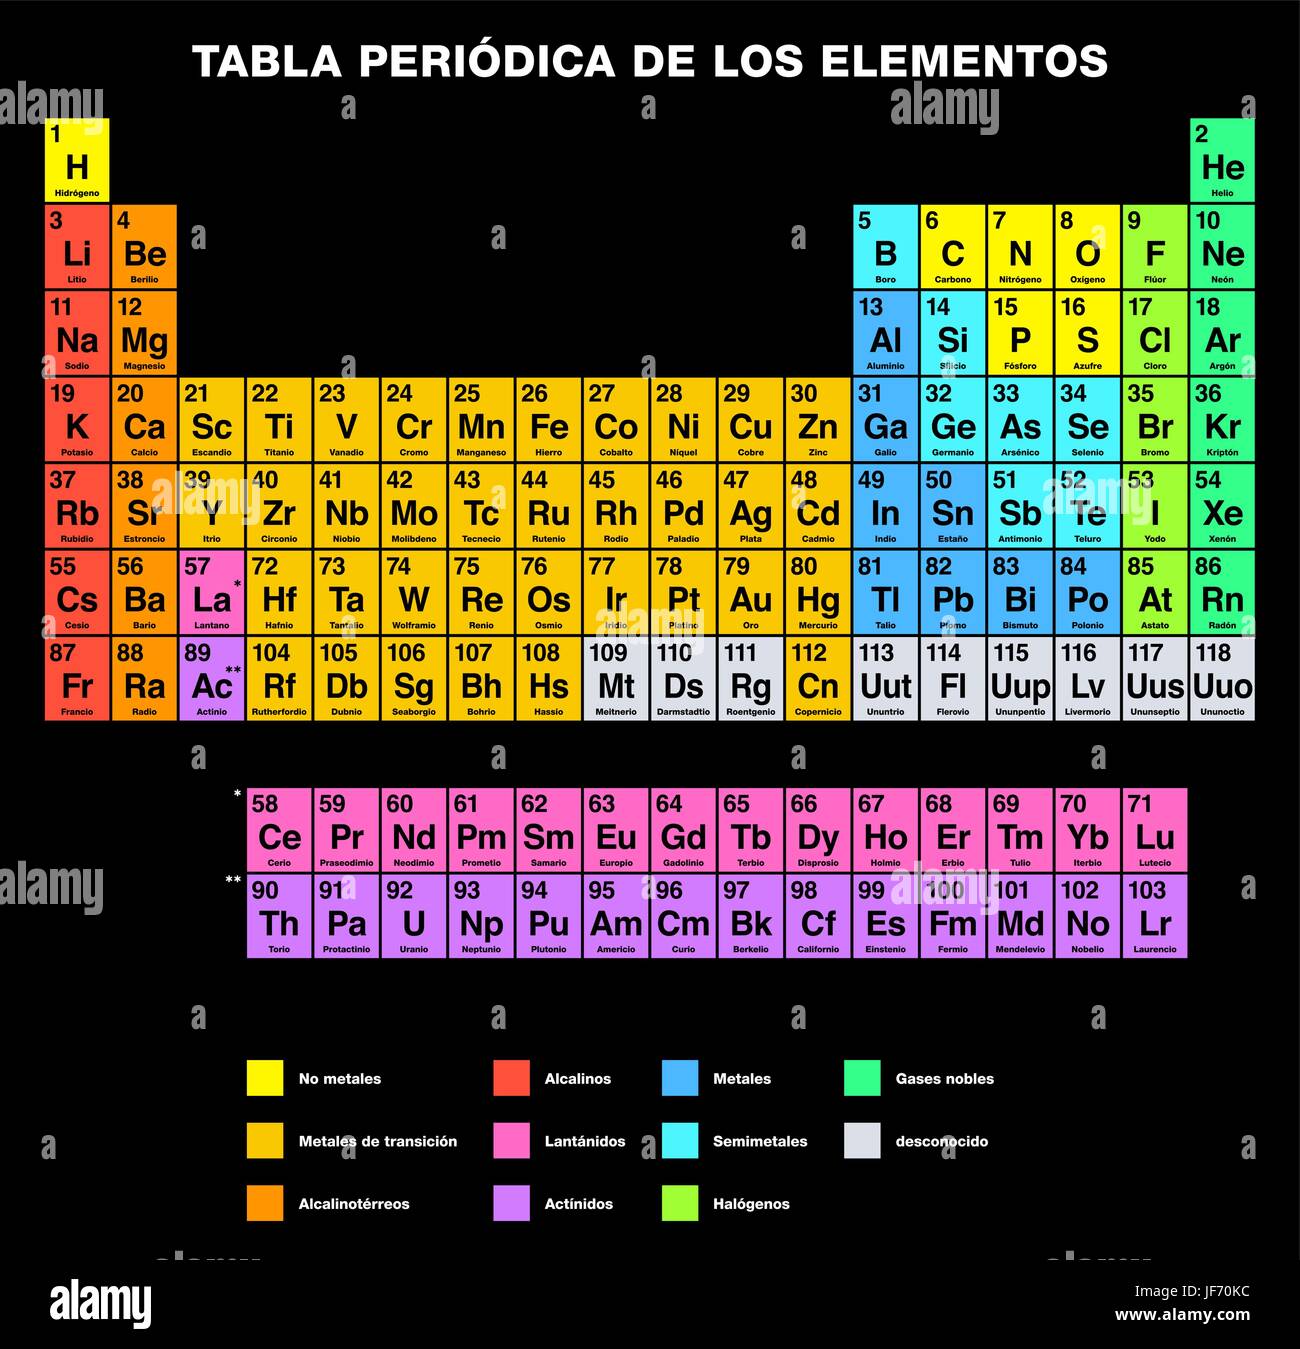 Periodic Table of the Elements SPANISH Labeling Stock Vector